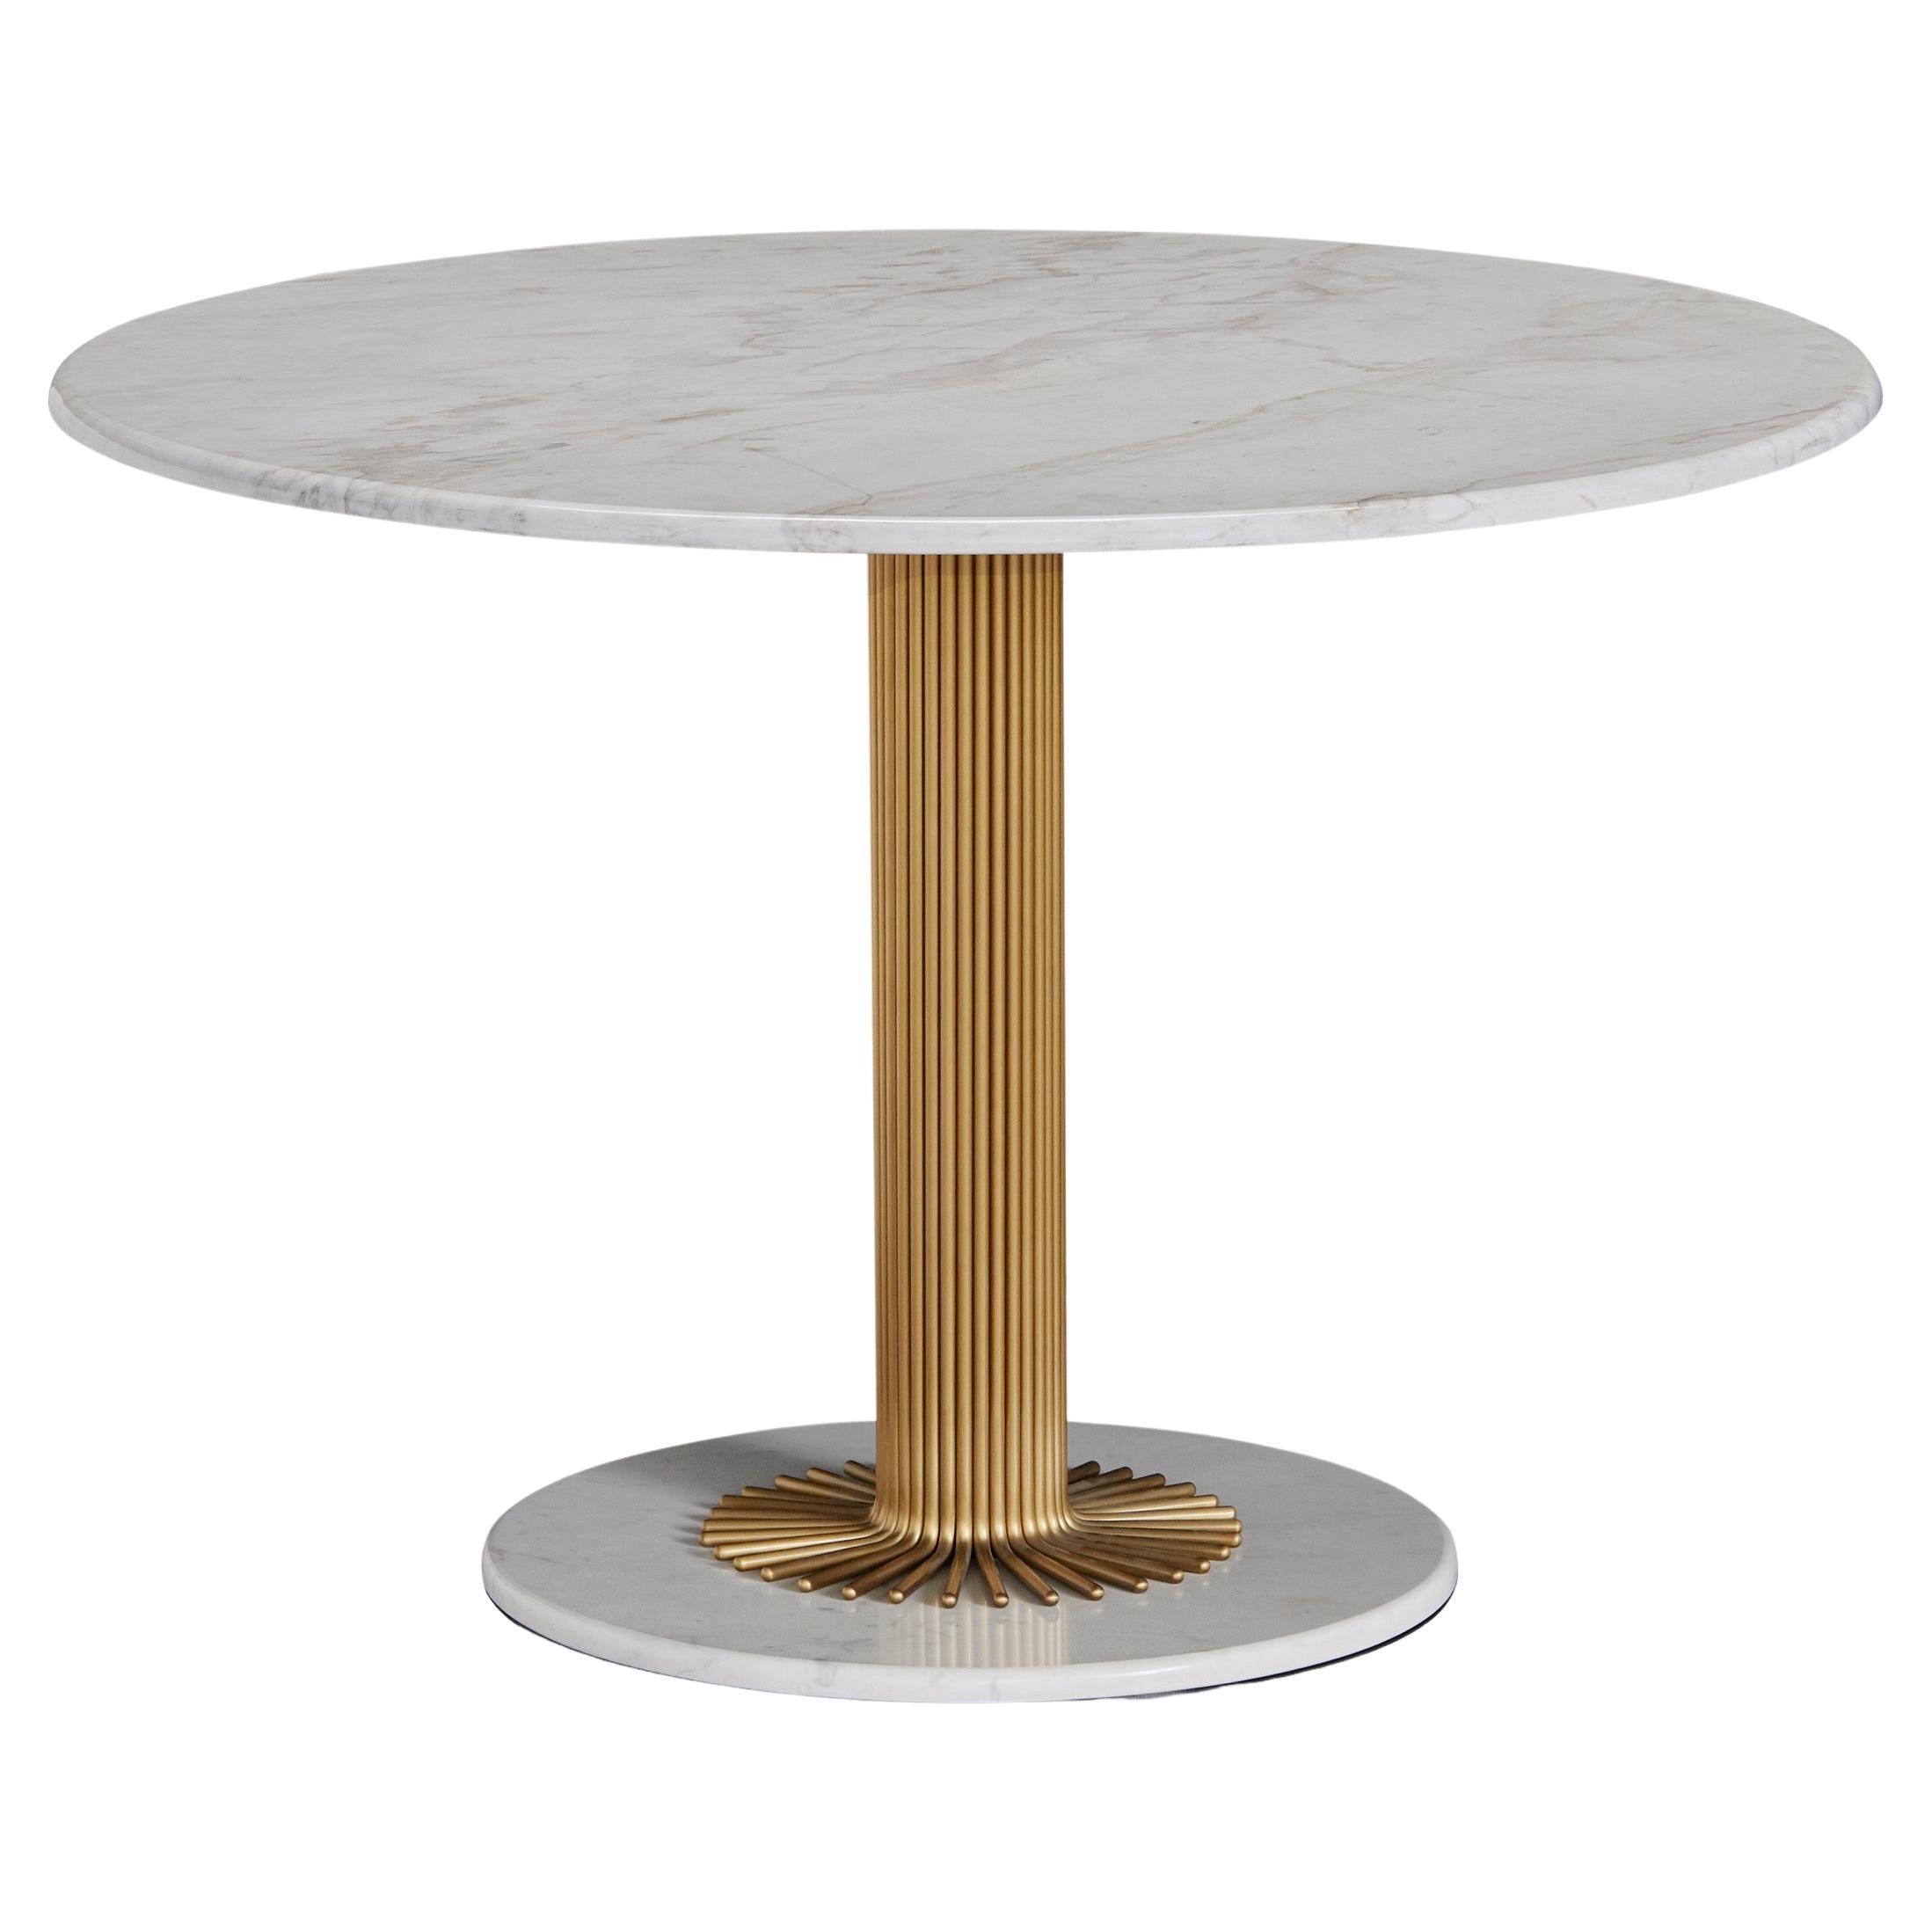 Santiago Hall Table in Olimpic White Marble Top and Antique Brass Foot